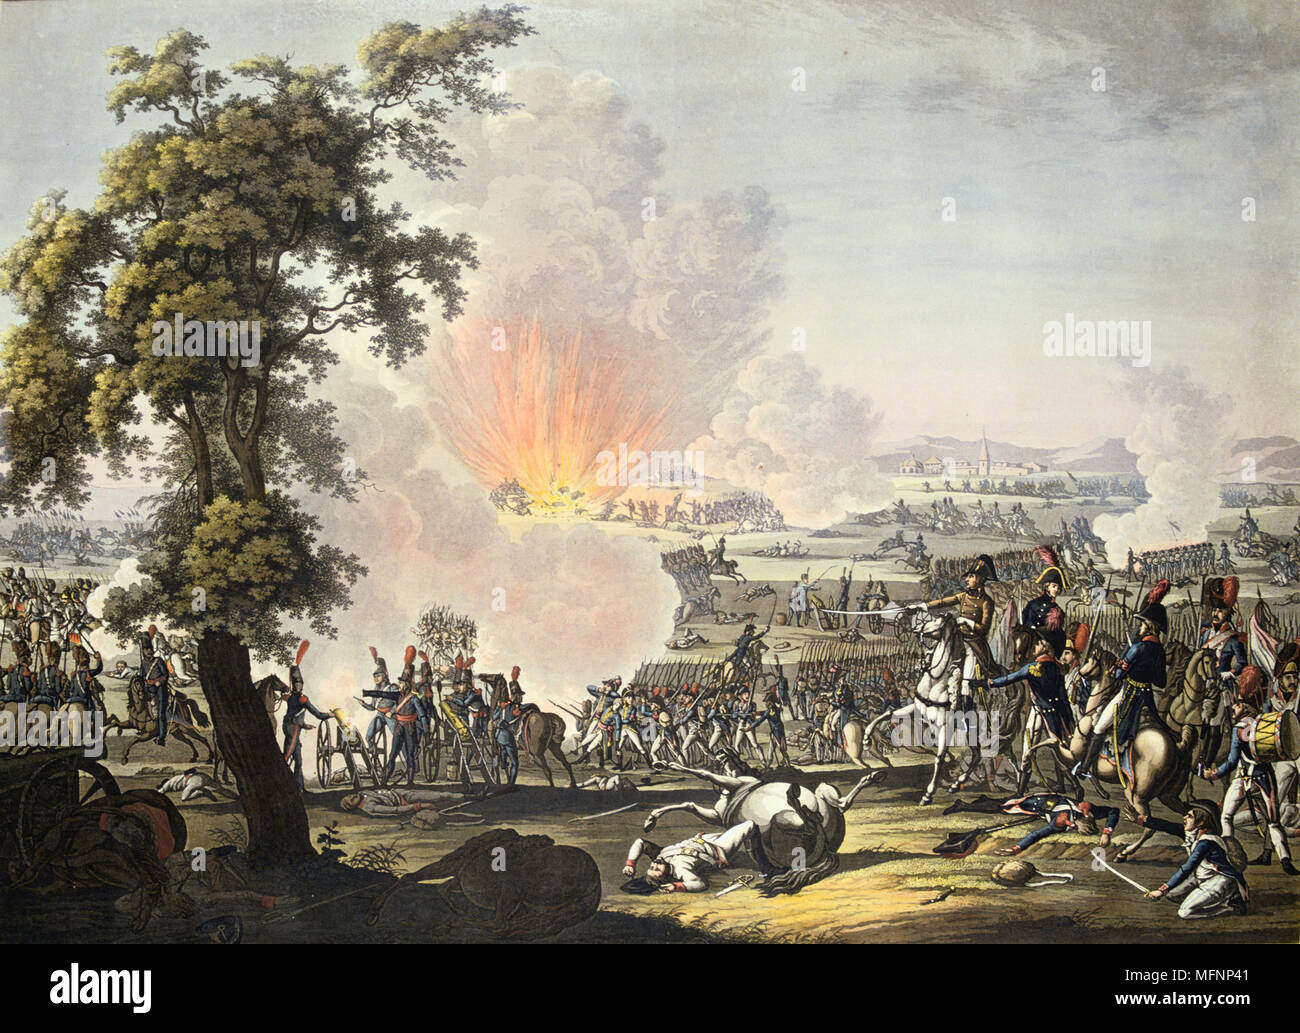 Napoleon at the Battle of Marengo, 14 June 1800. French forces under Napoleon defeated Austrians.  Engraving Stock Photo